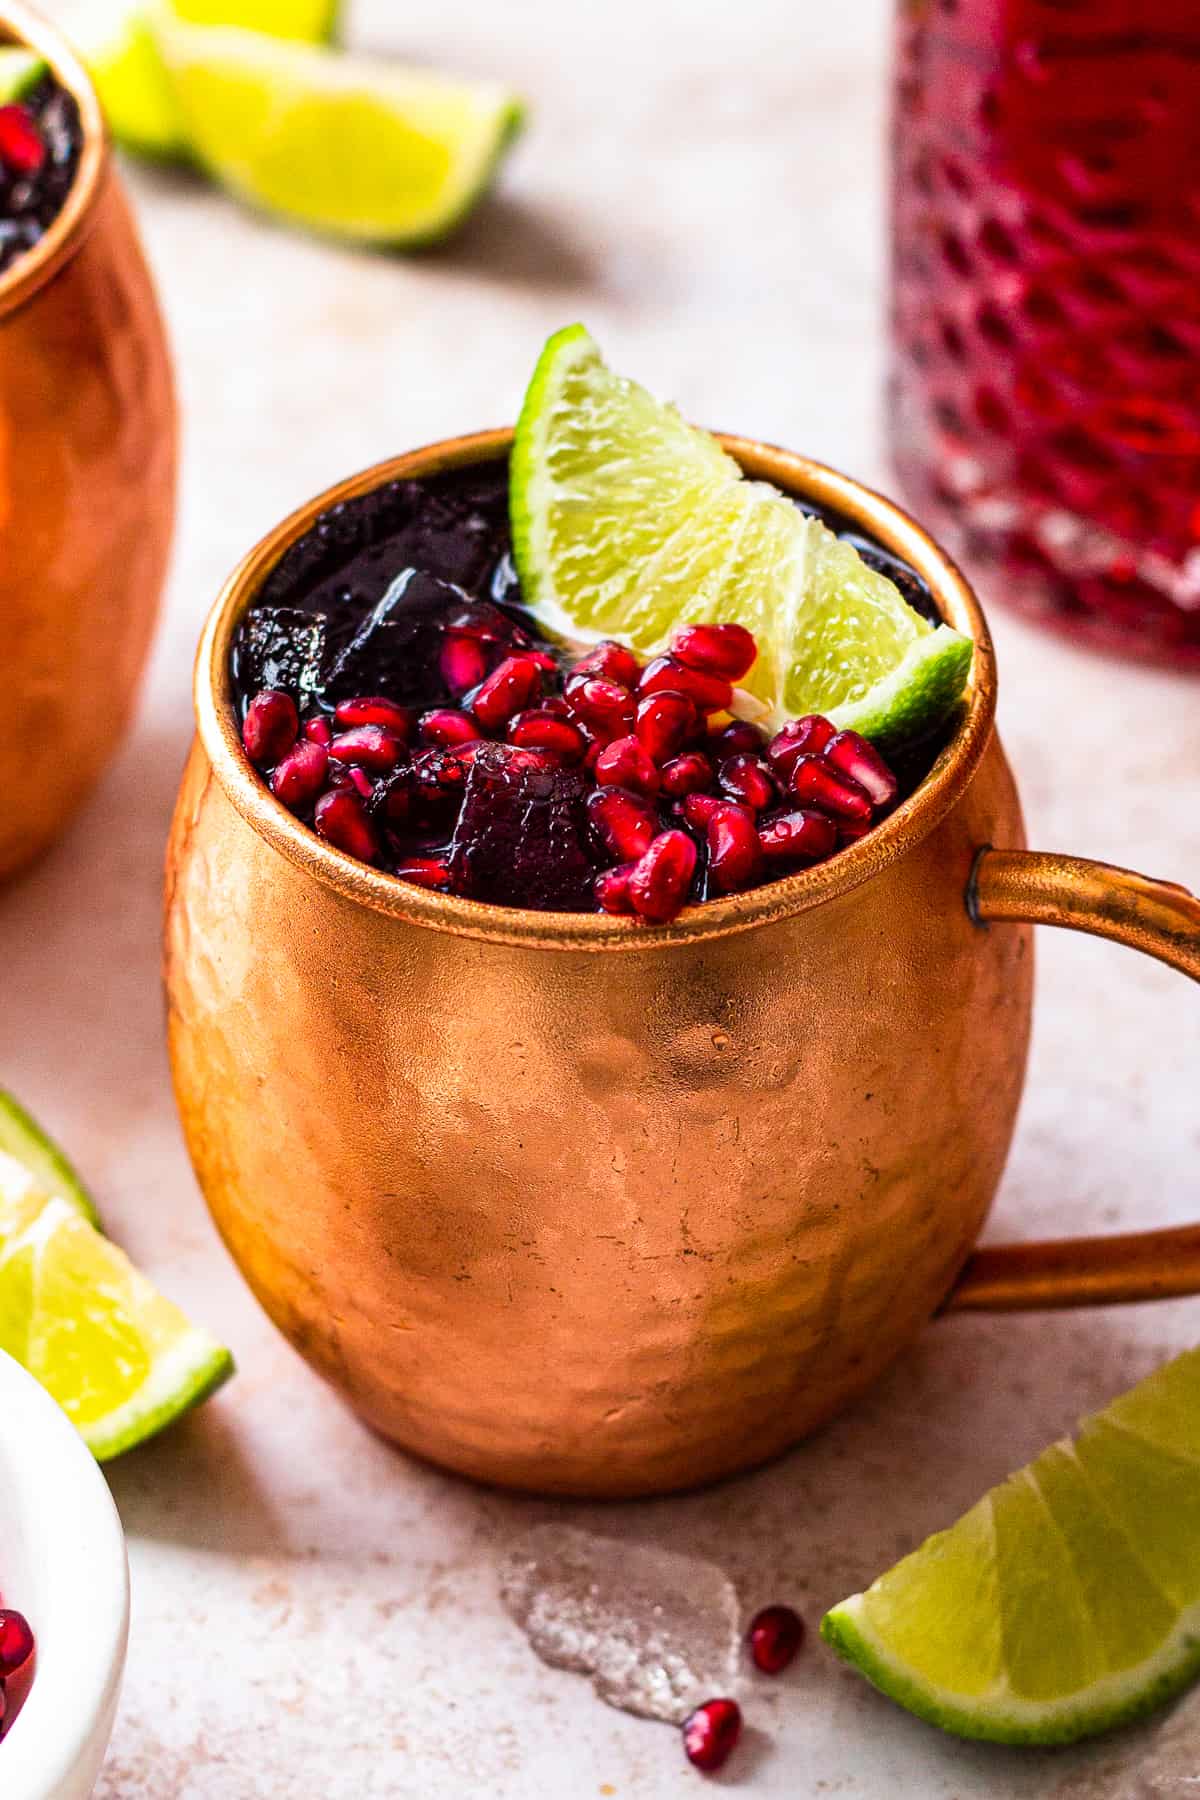 Best Moscow Mule Punch Recipe - How to Make Moscow Mule Punch